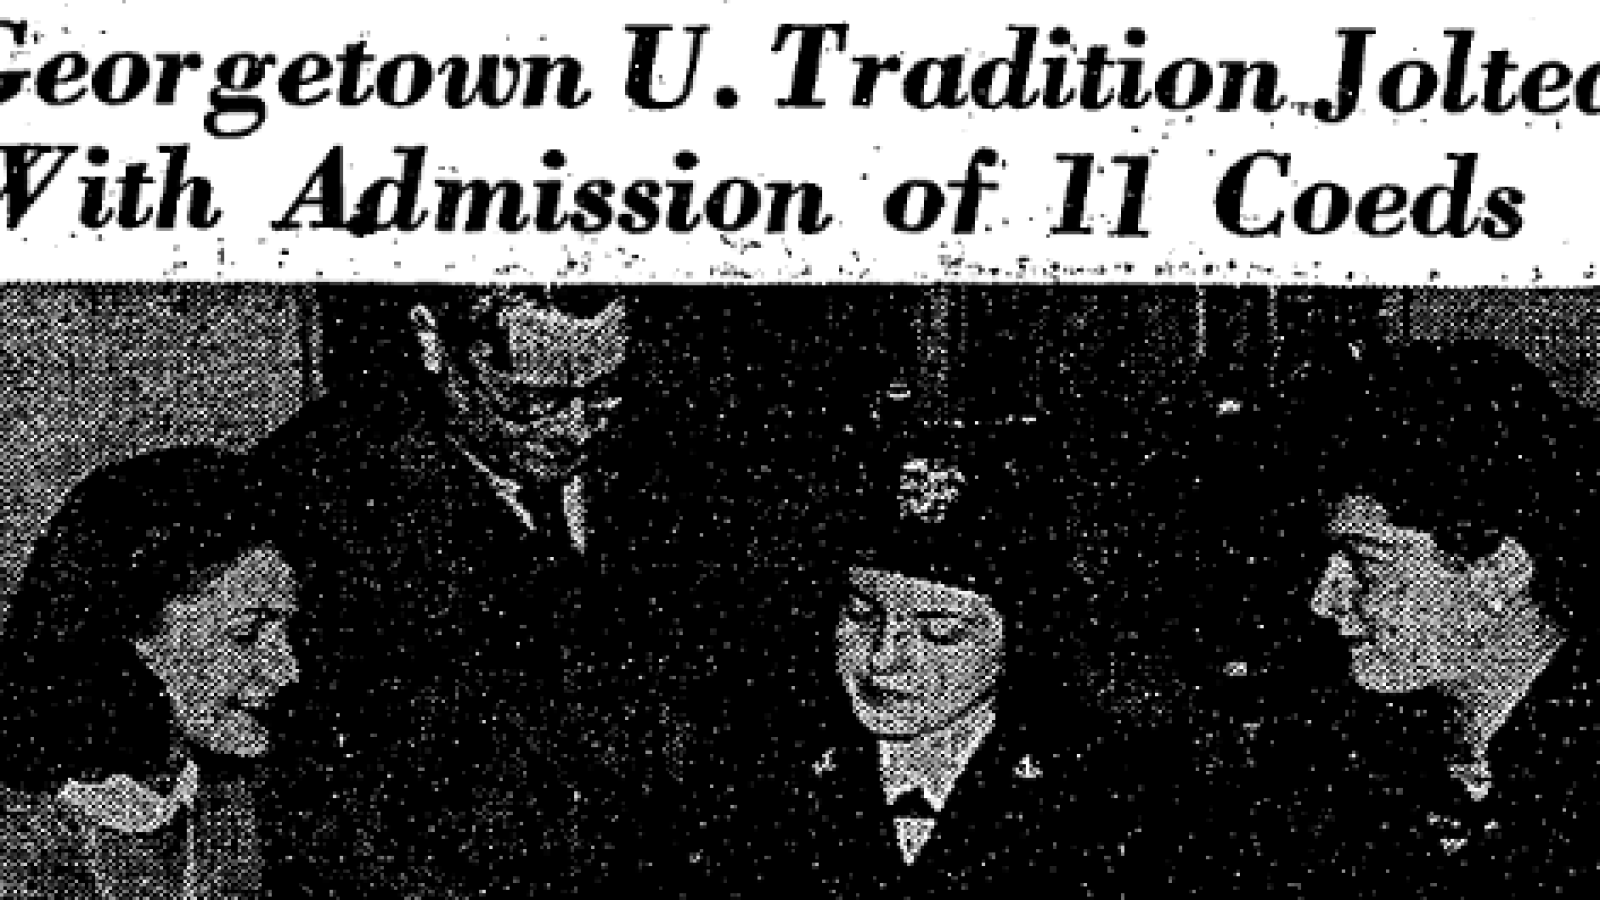 "Georgetown U. Tradition Jolted with Admission of 11 coeds